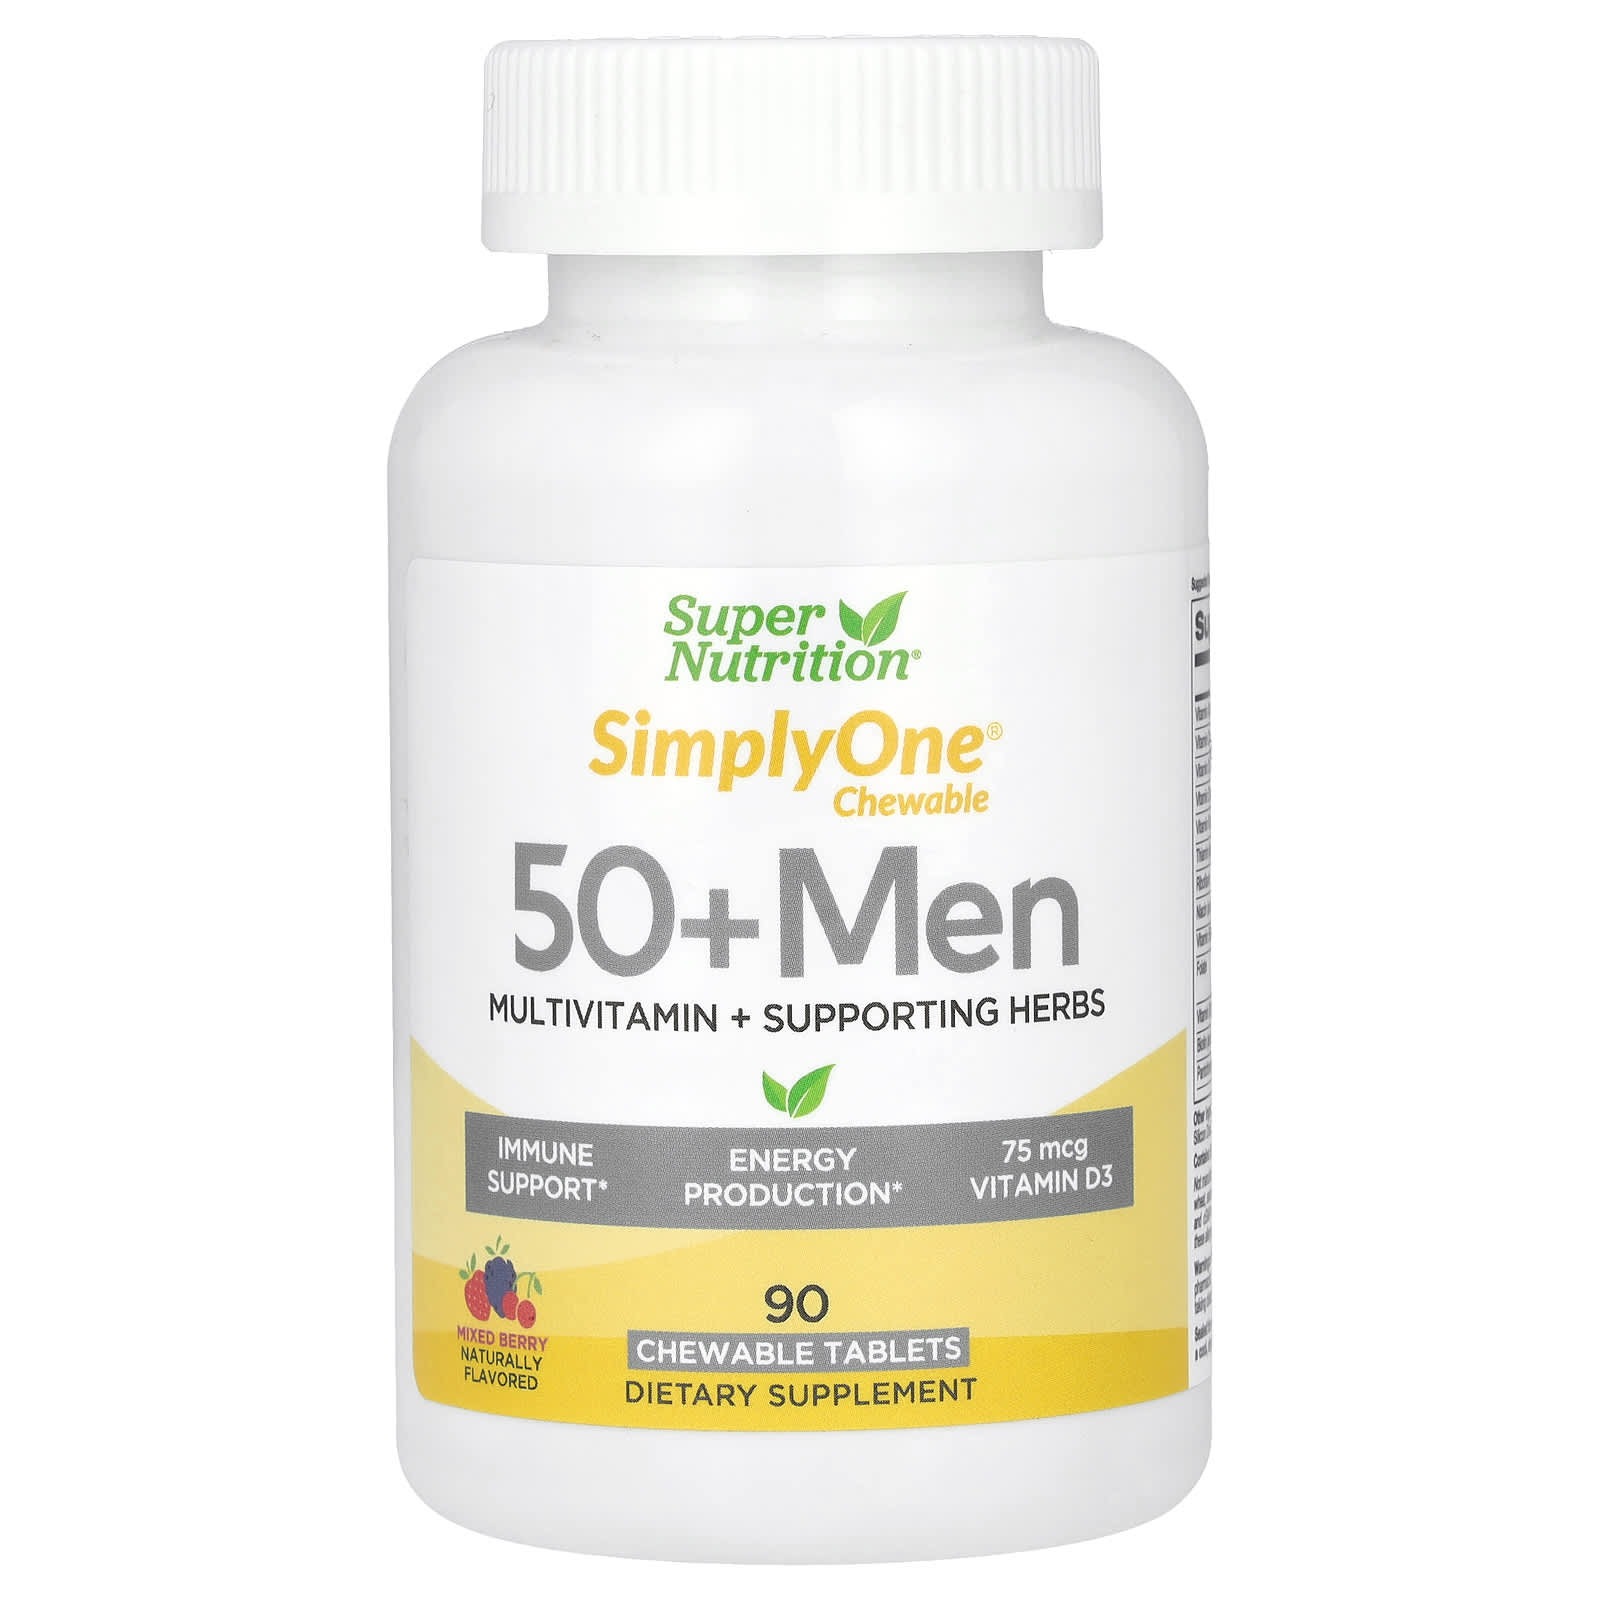 Super Nutrition-SimplyOne-50+ Men's Multivitamin + Supporting Herbs-Mixed Berry-90 Chewables